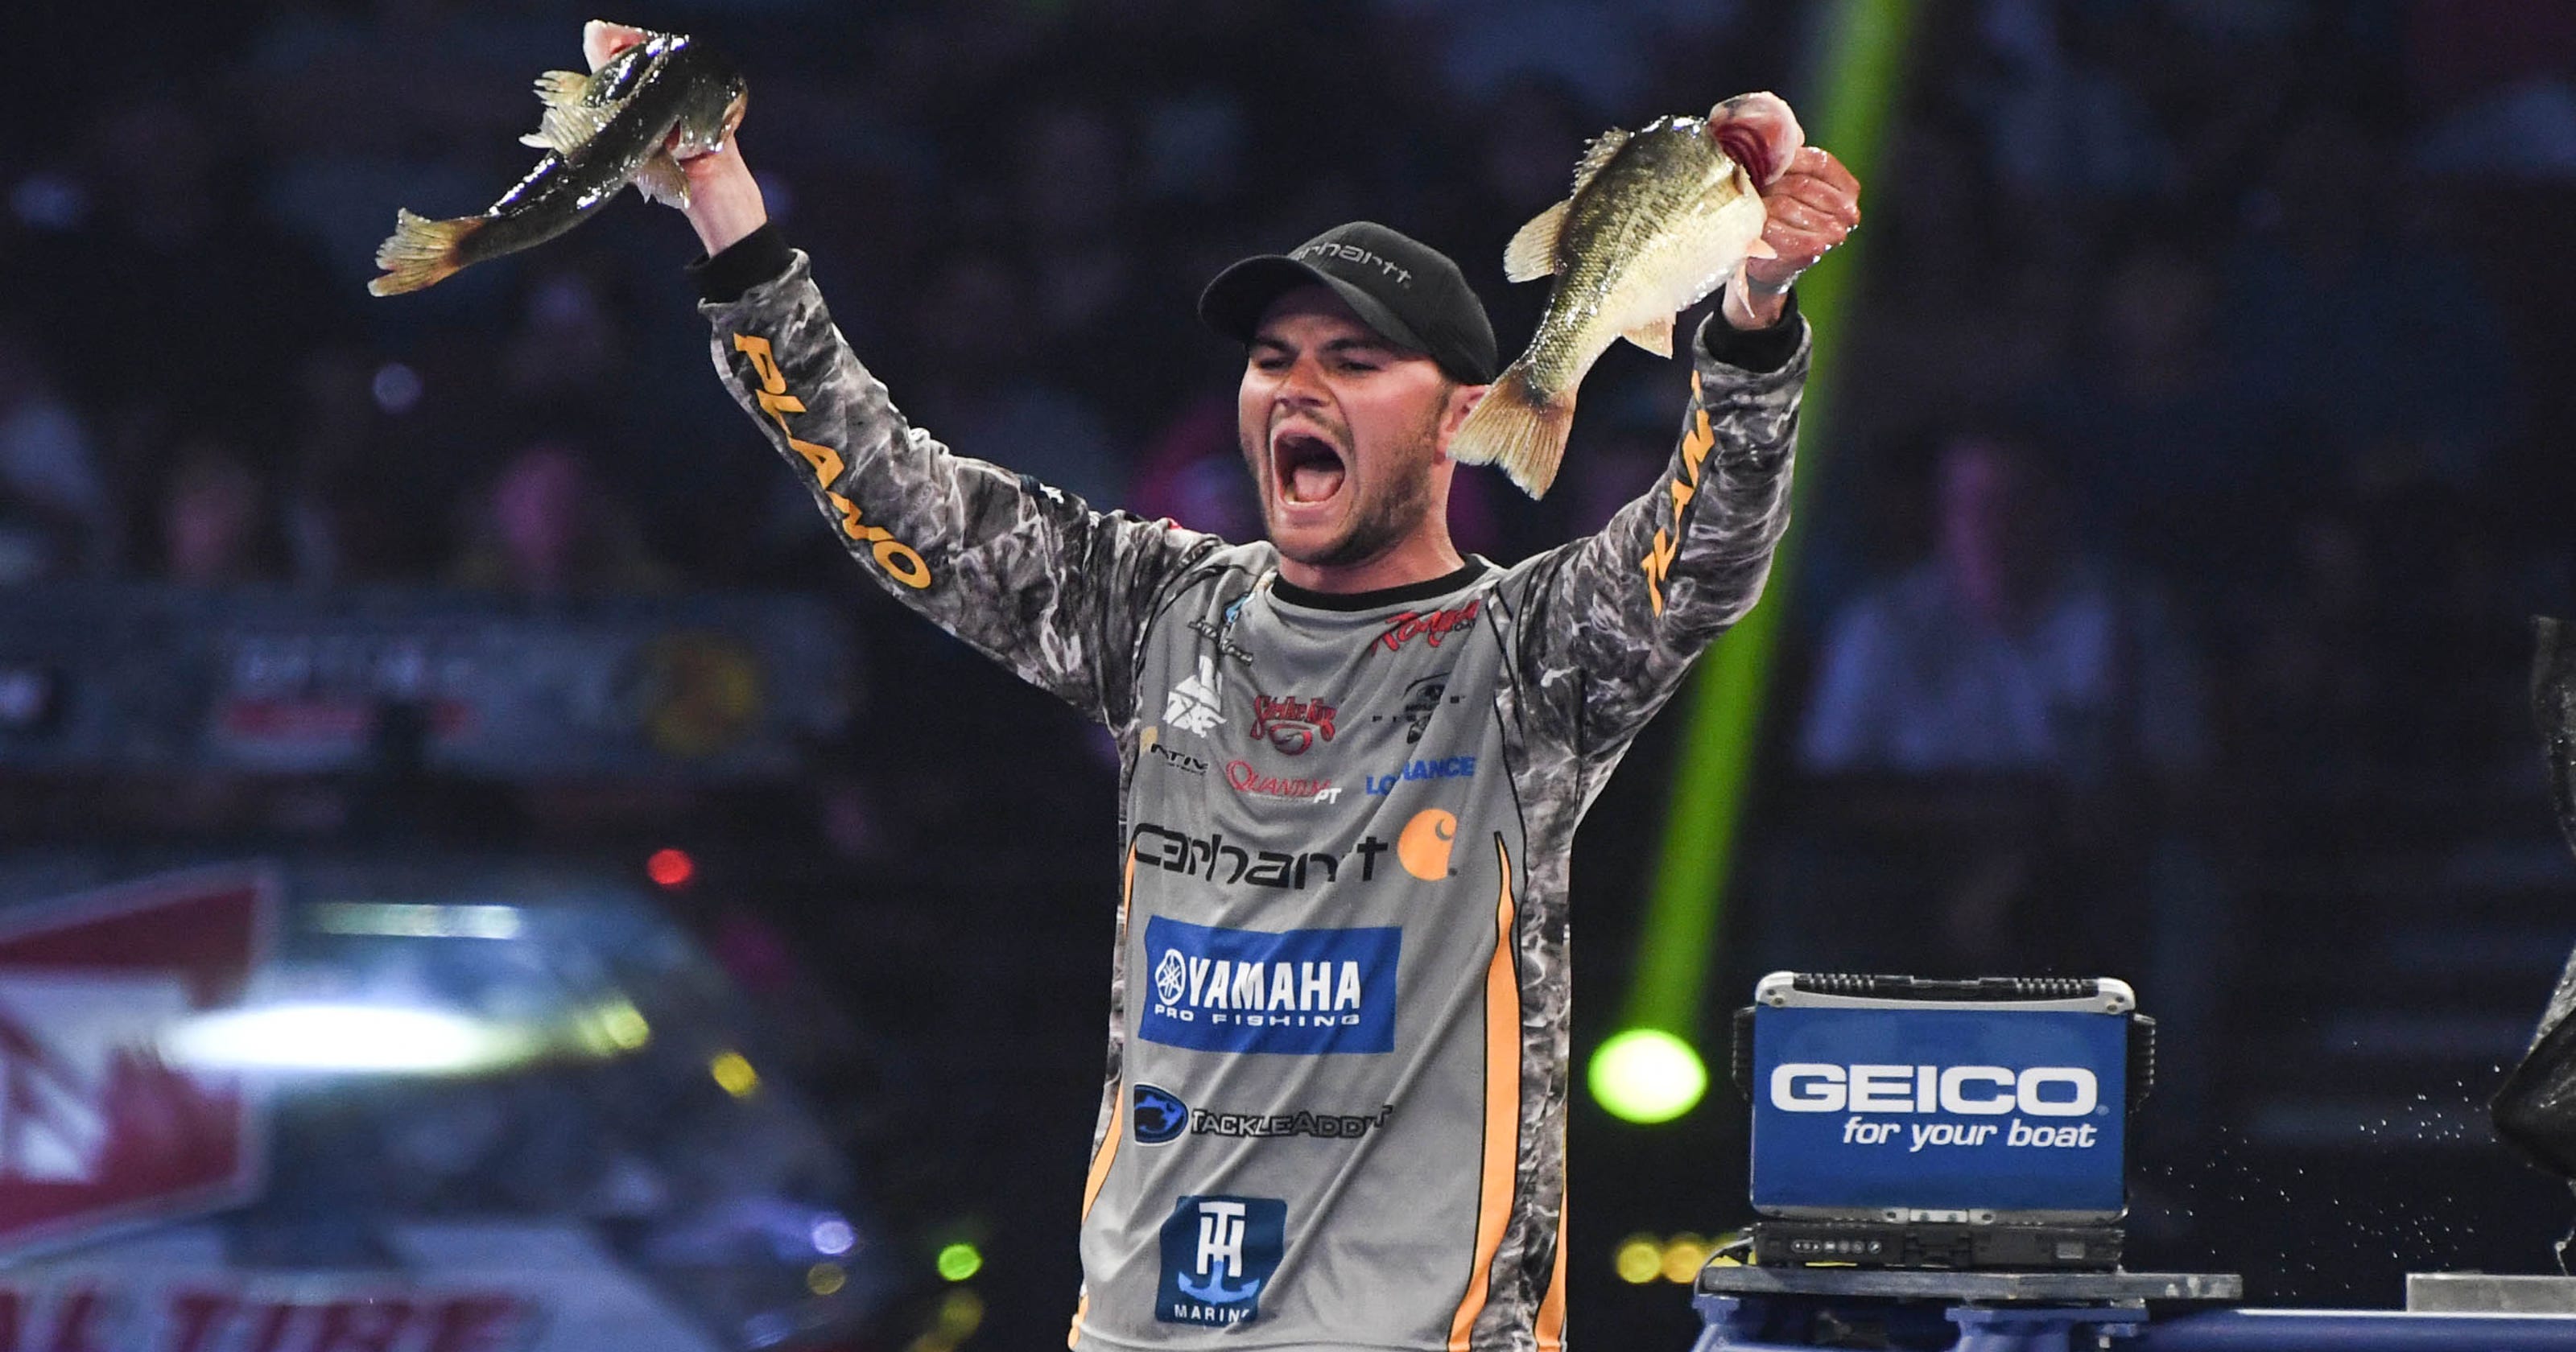 Bassmaster Classic How to watch, livestream the bass fishing tournament